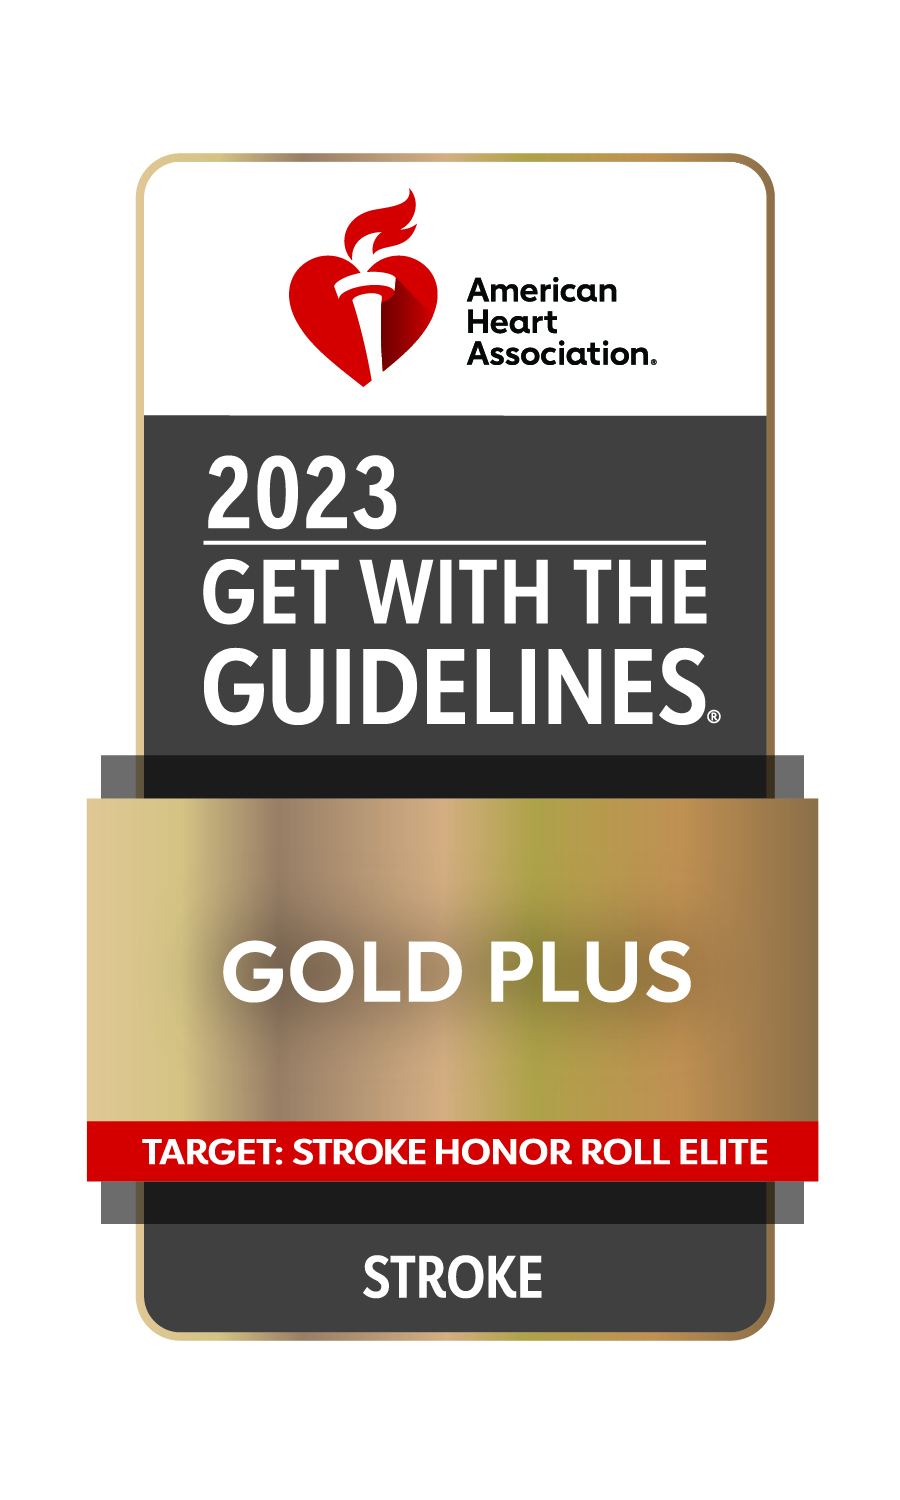 Get With the Guidelines 2023 Stroke Gold Plus Achievement Award with Target: Stroke Honor Roll Elite icon